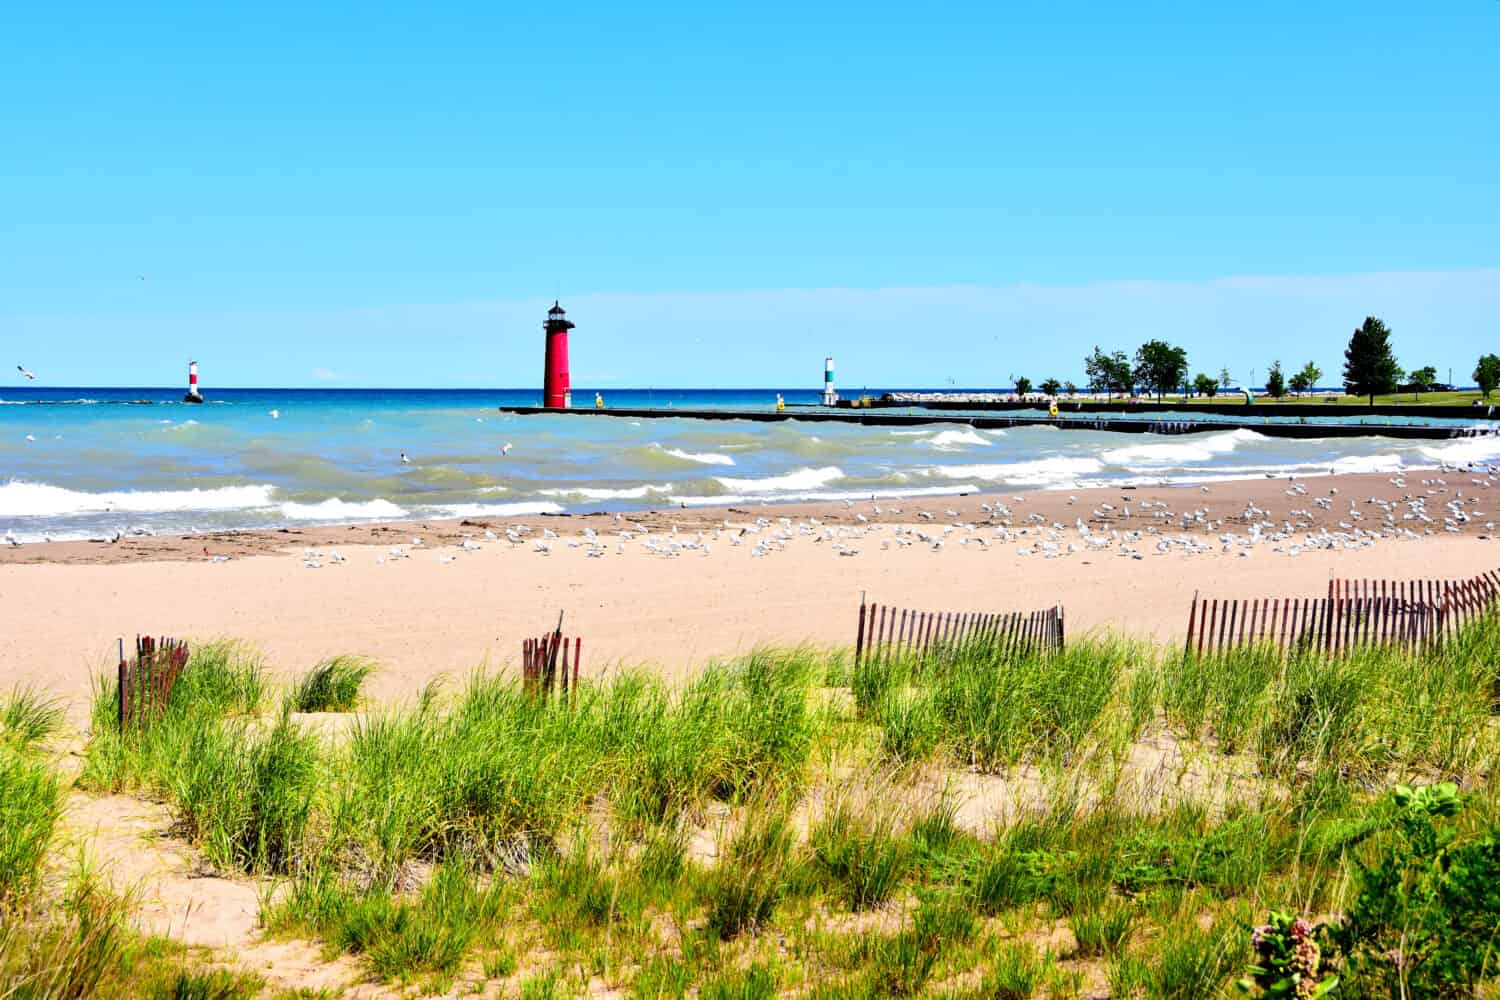 The distant lighthouse port and starboard markers as seen from Simmons Island along the shore line of Lake Michigan with sand beach and wild grasses in the foreground.  